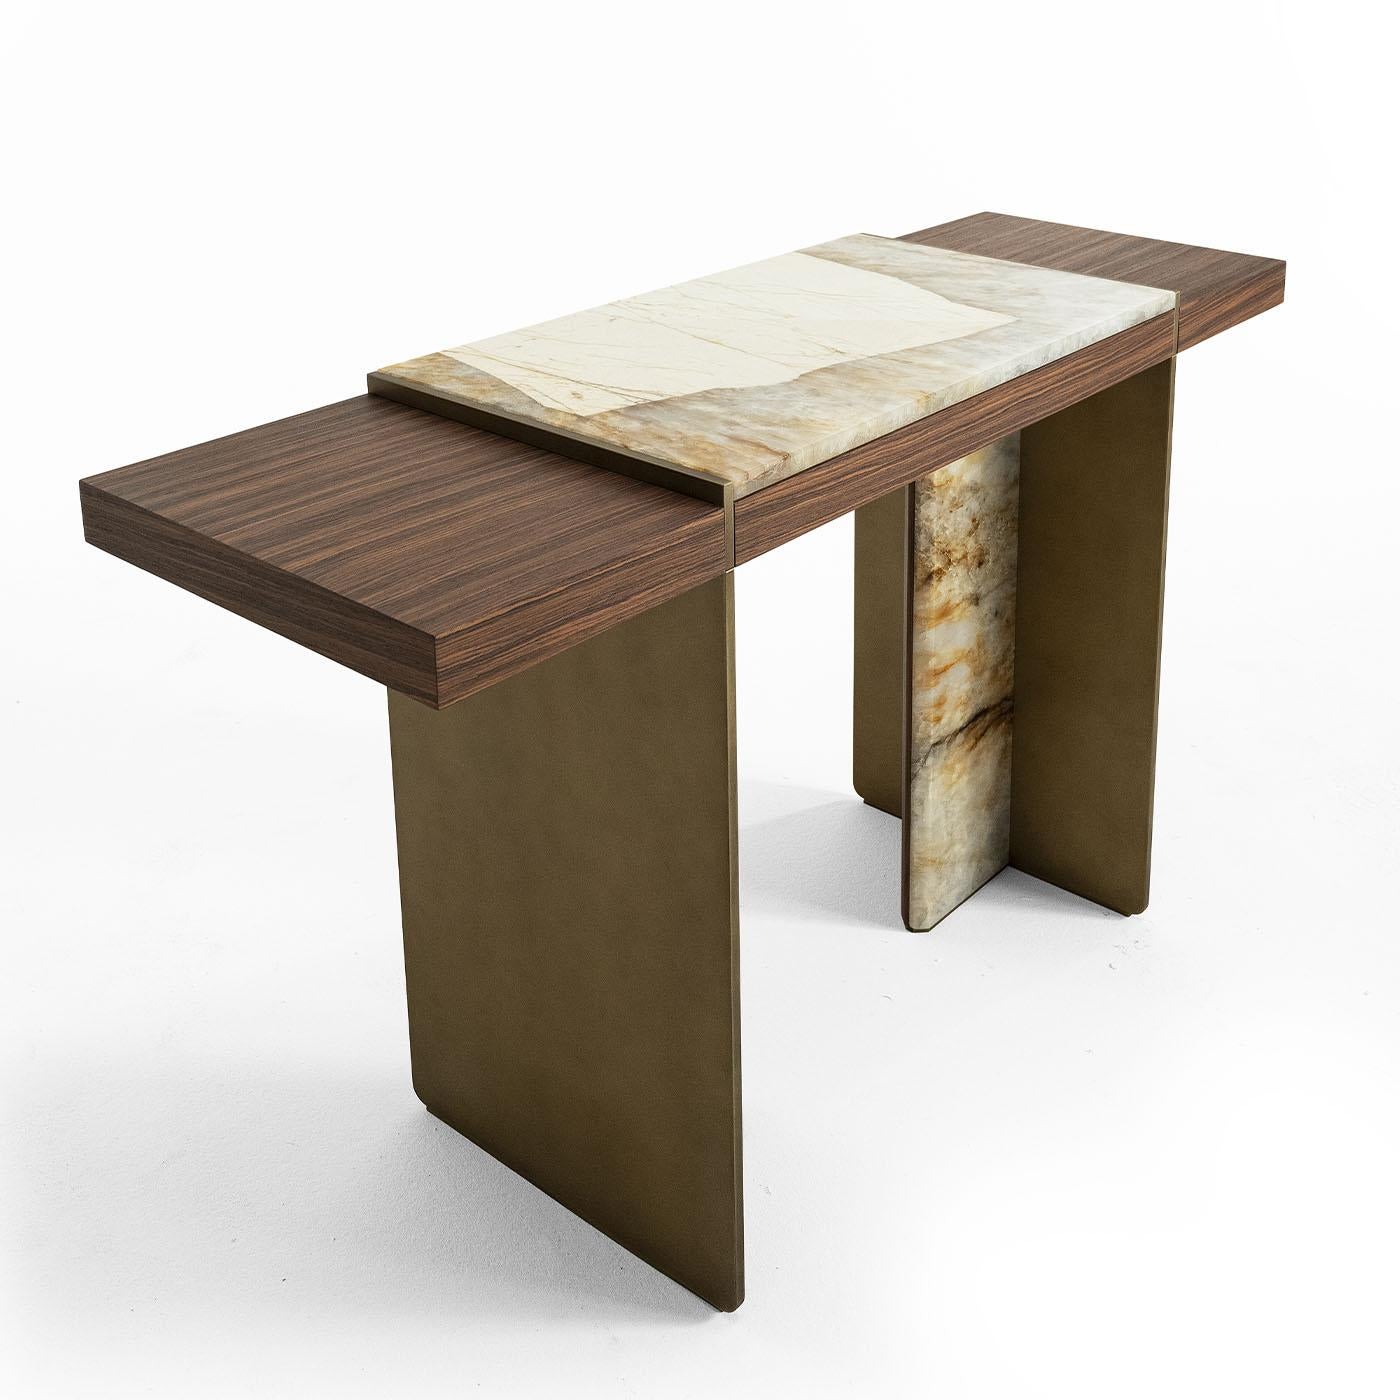  Console in striped rosewood CGB422, TL09 cloudy gold metal insert, MR40 Patagonia marble insert and top